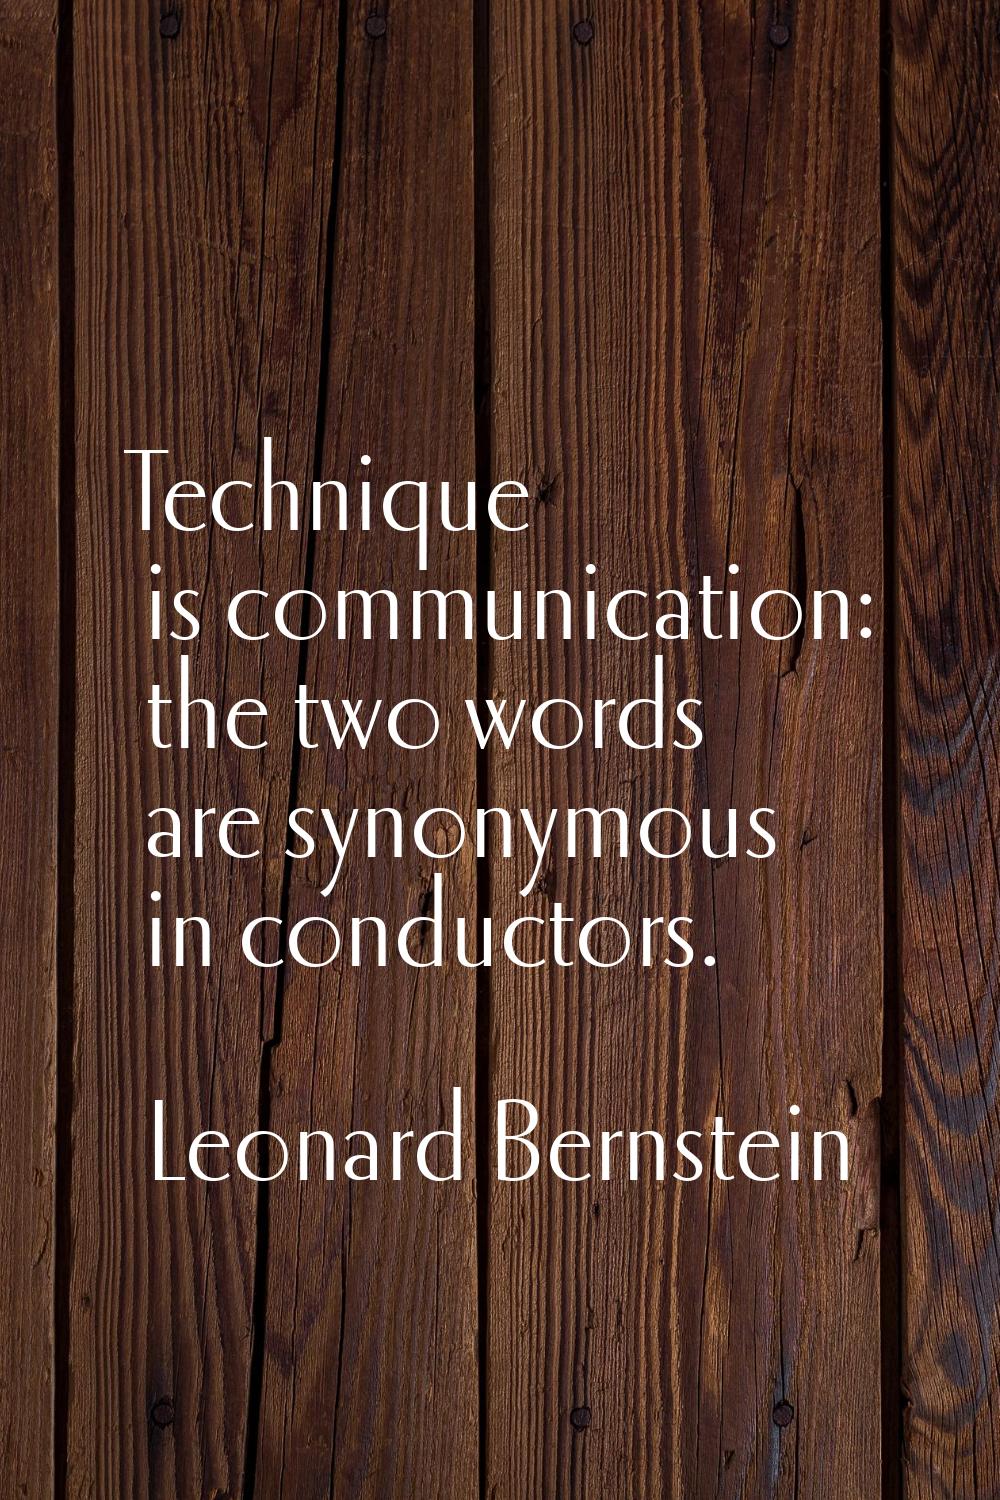 Technique is communication: the two words are synonymous in conductors.